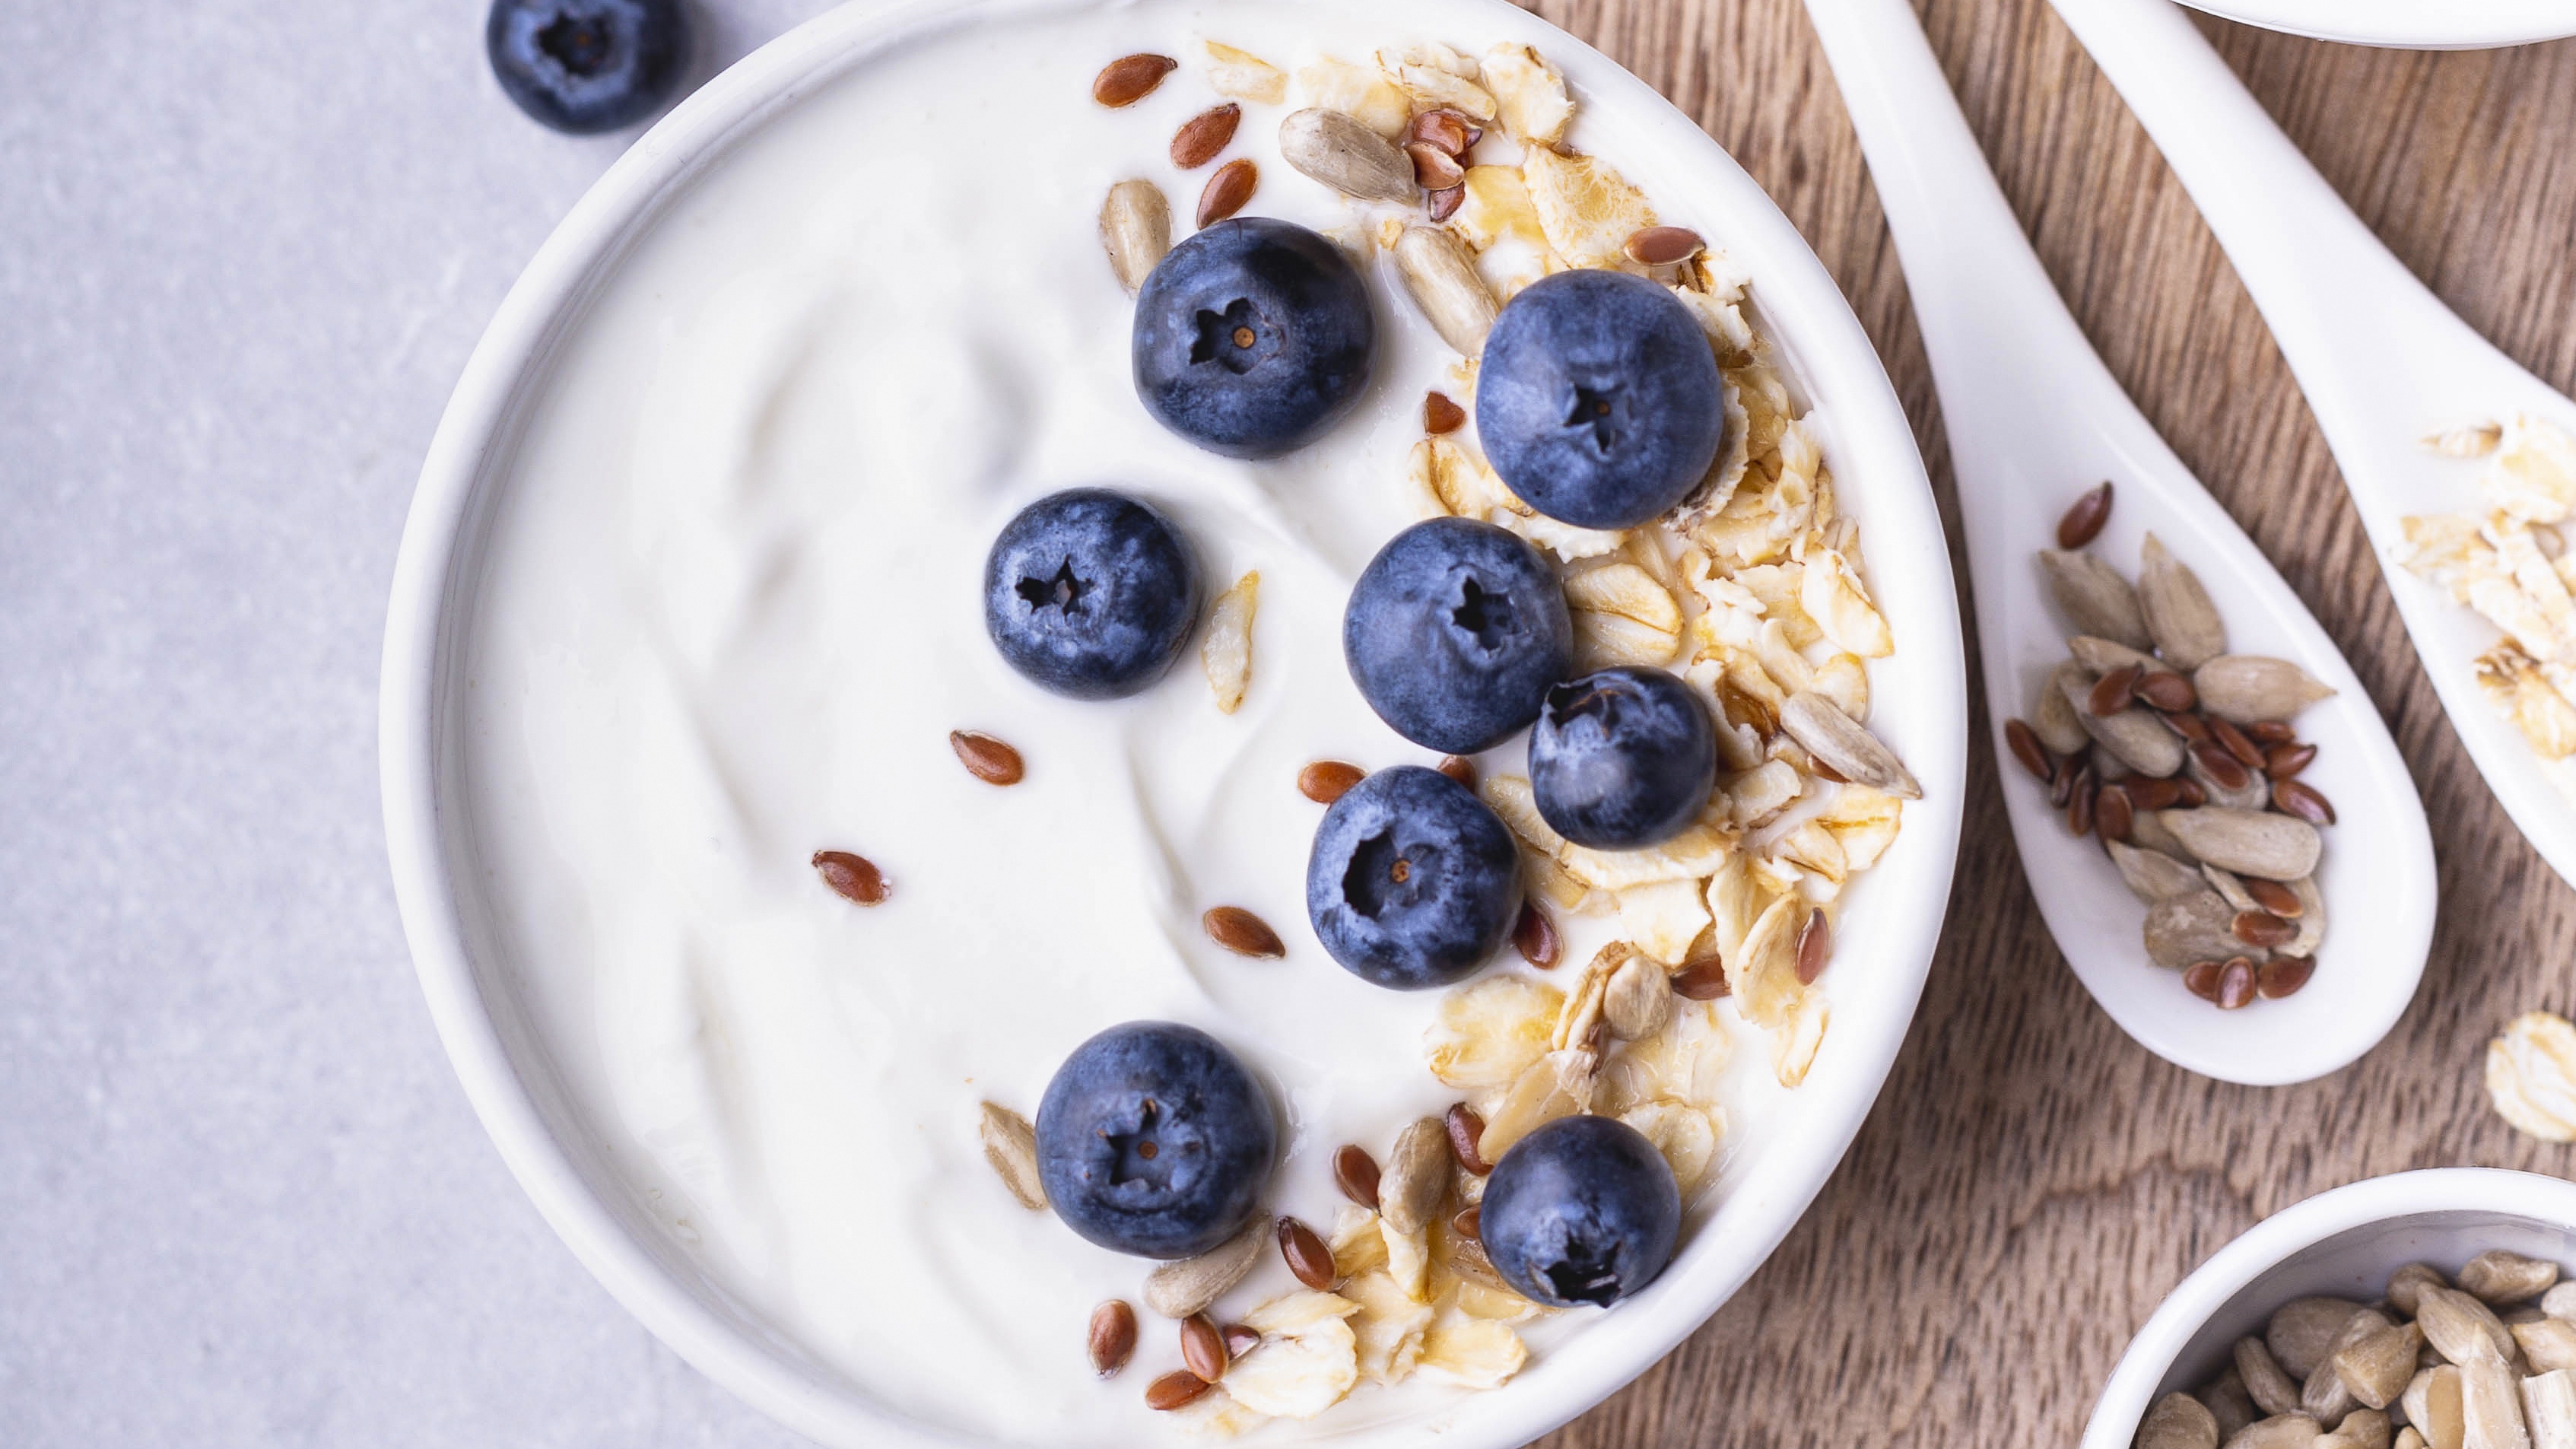 Eat Blueberries With Dairy to Boost Nutrient Absorption | First For Women